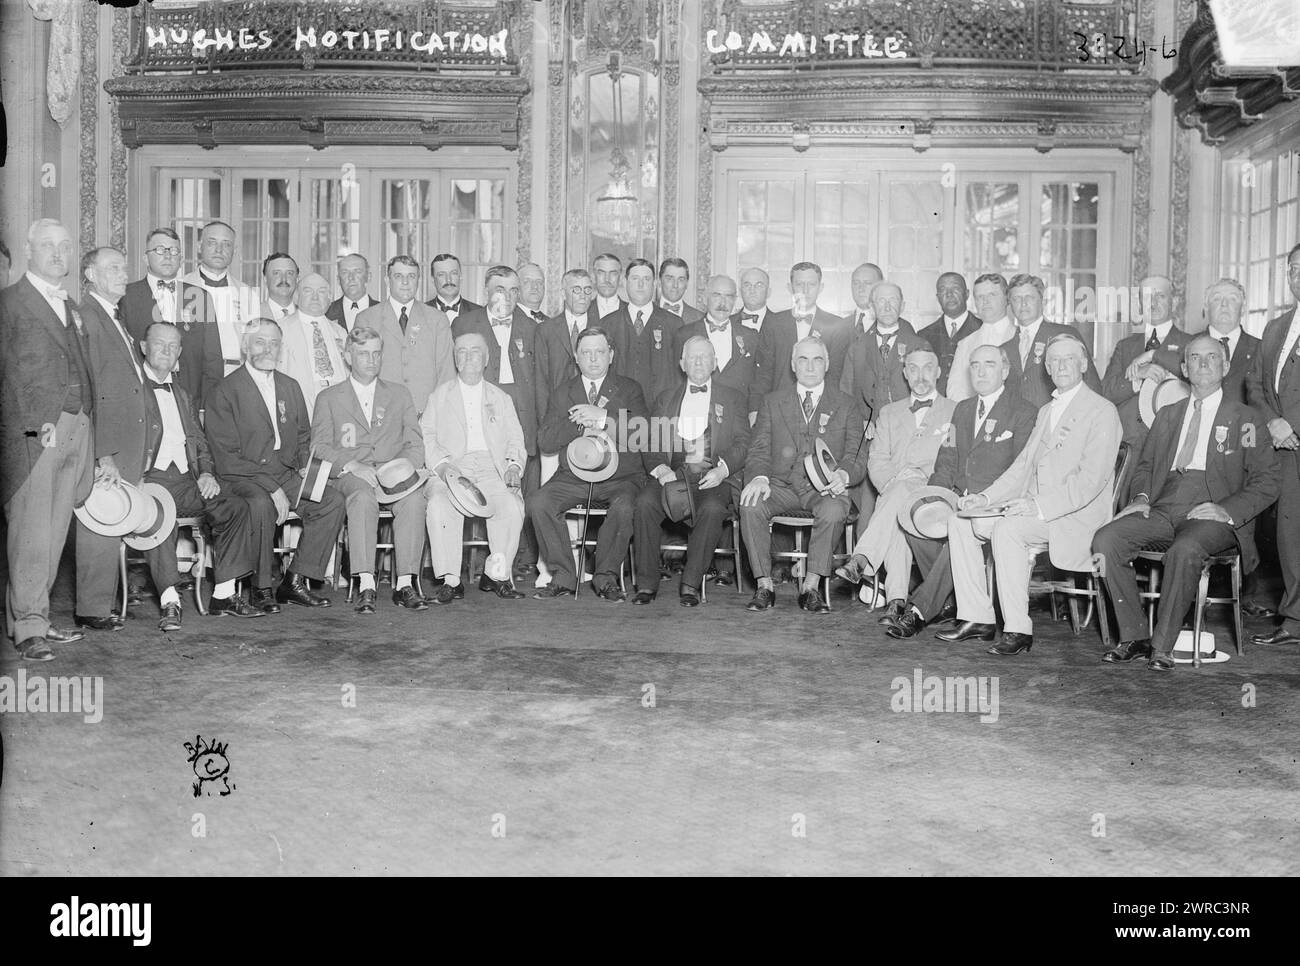 Hughes Notification Committee, Photograph shows the committee of Republicans gathered in New York to select their presidential candidate. Ohio Senator Warren G. Harding is seated at center right holding hat., 1916 July, Glass negatives, 1 negative: glass Stock Photo